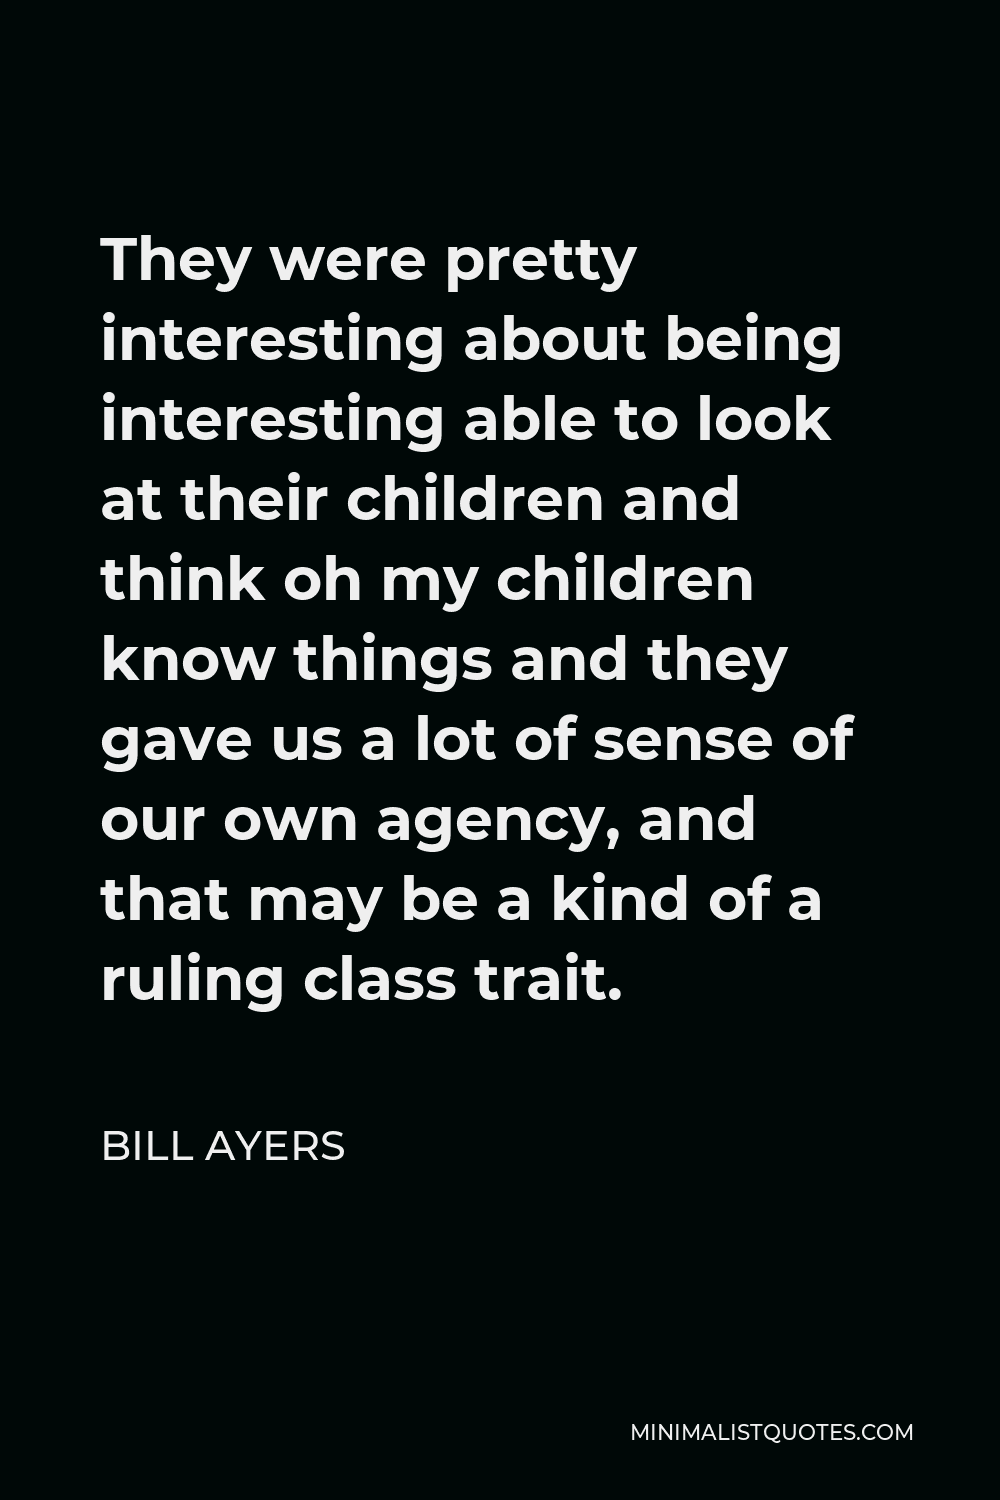 Bill Ayers Quote - They were pretty interesting about being interesting able to look at their children and think oh my children know things and they gave us a lot of sense of our own agency, and that may be a kind of a ruling class trait.